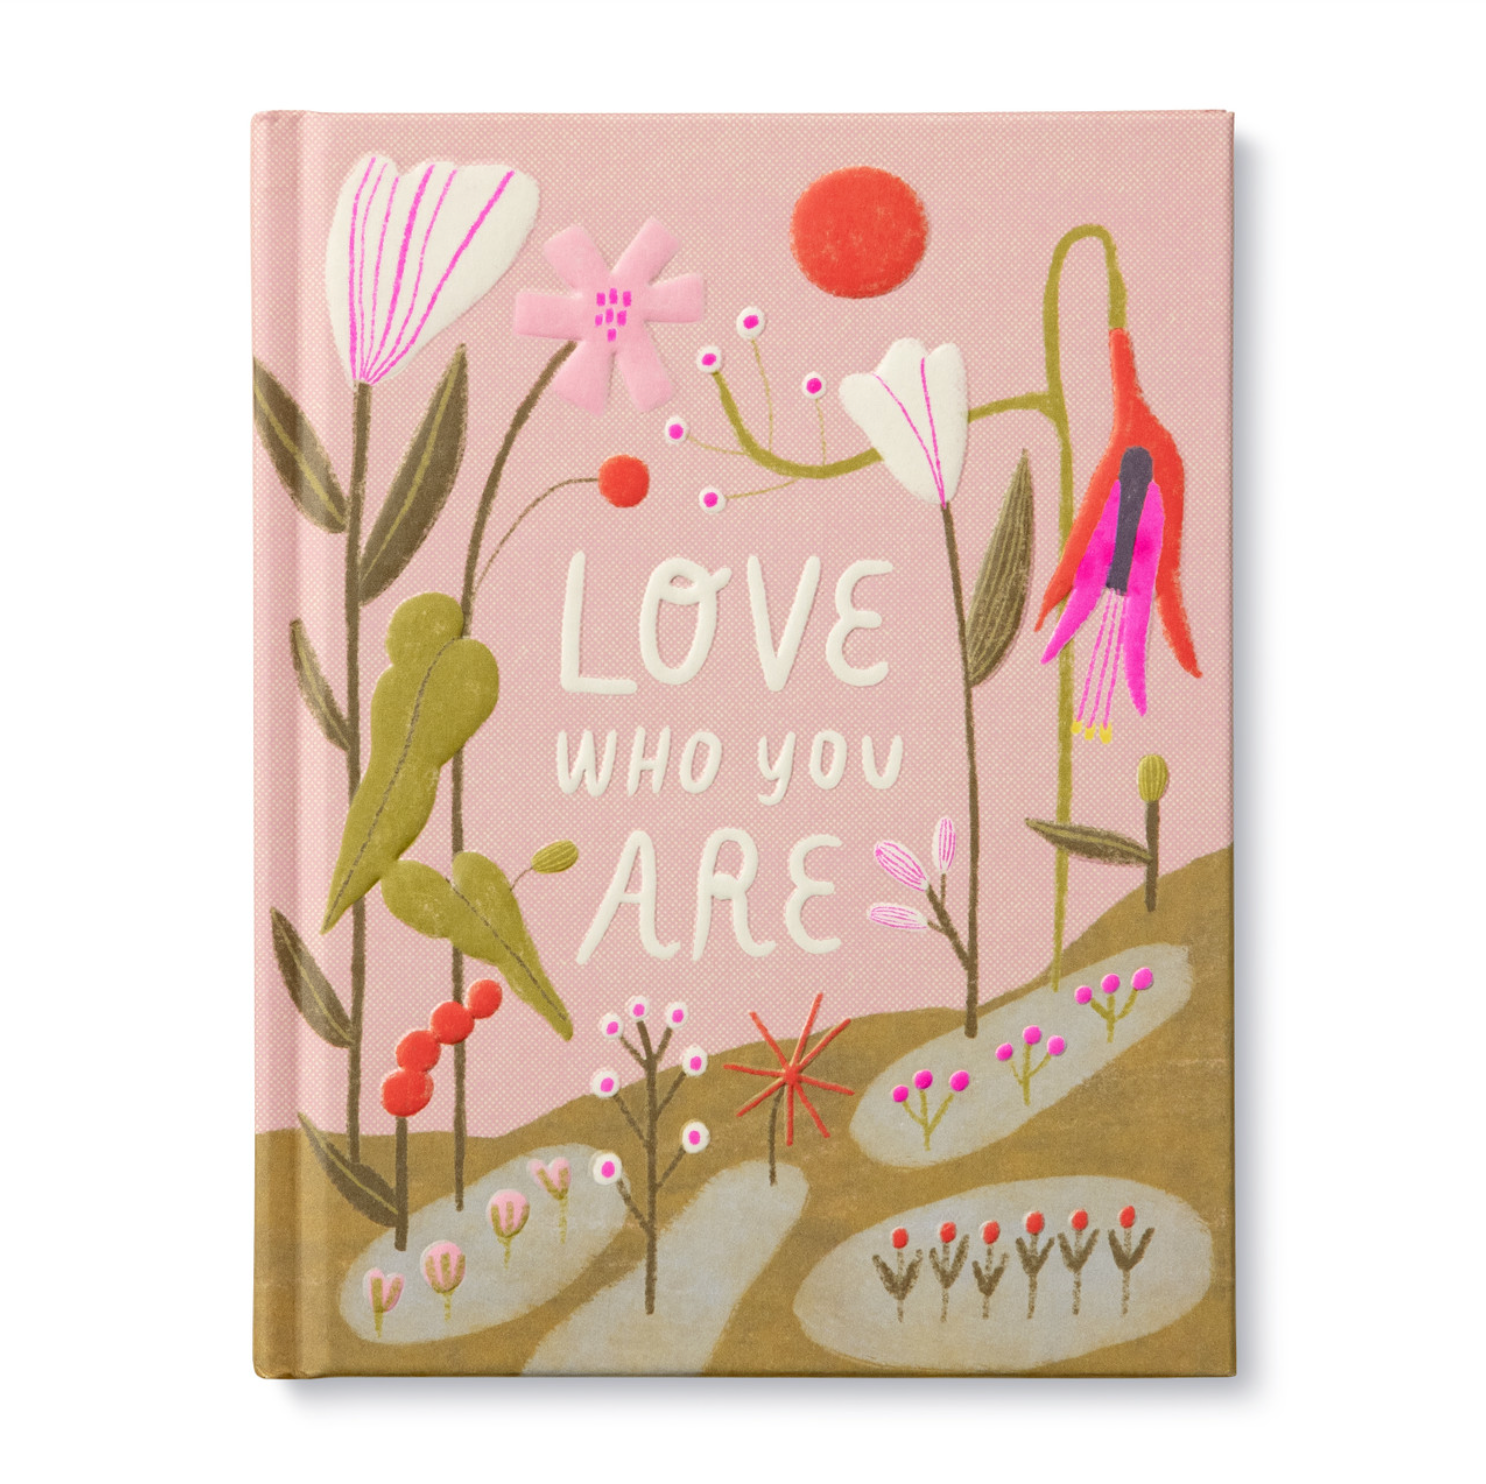 love who you are hardcover inspiration book